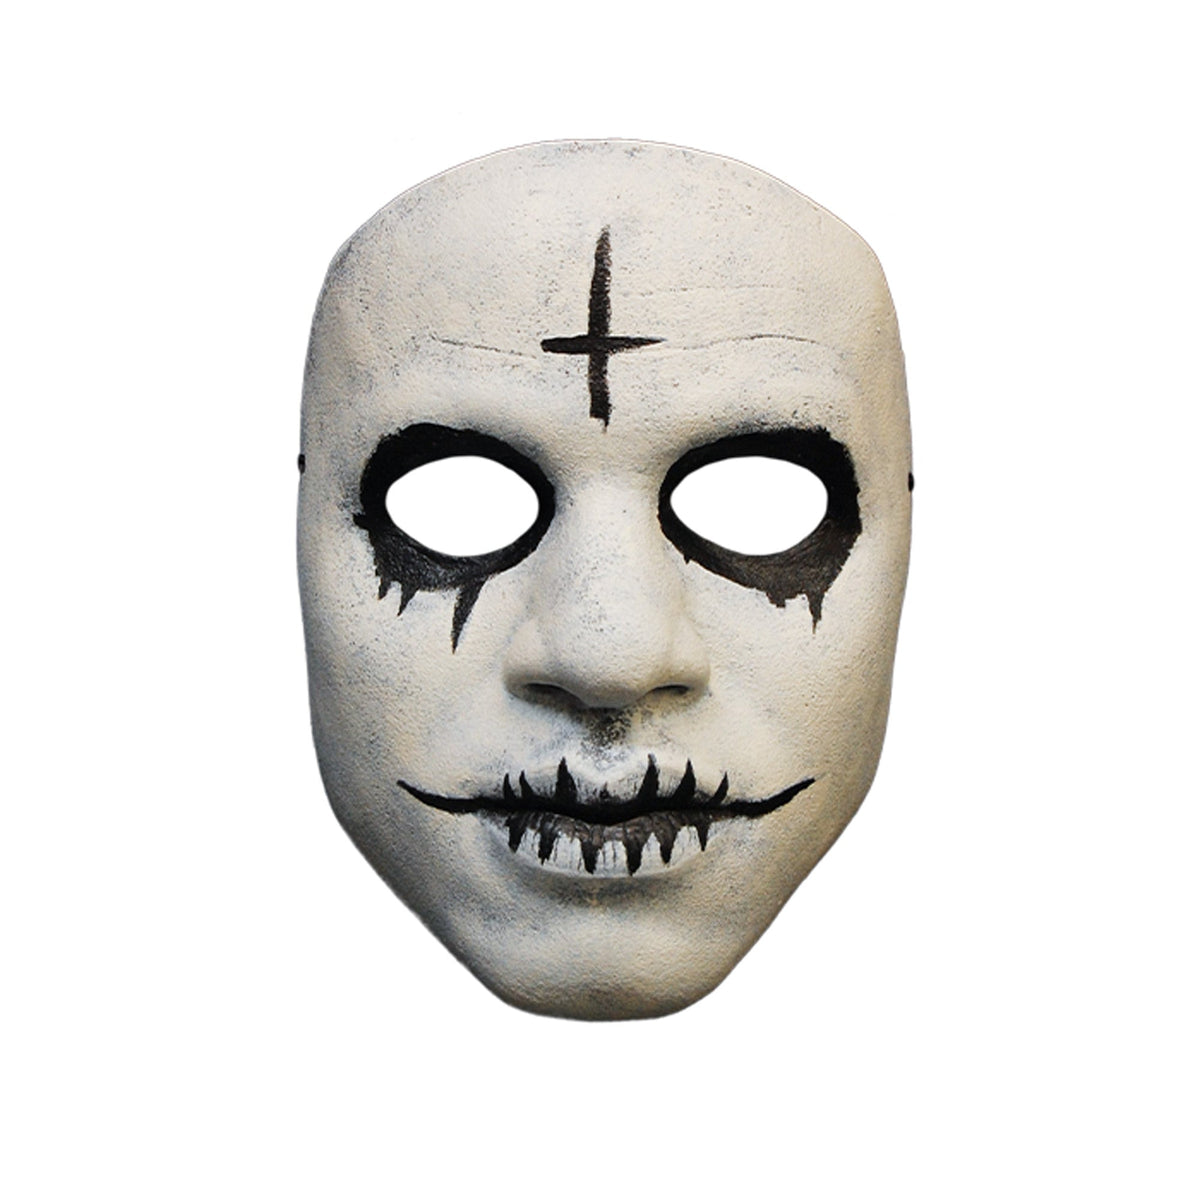 TRICK OR TREAT STUDIOS INC Costume Accessories The Purge Killer Mask for Adults 811501035428